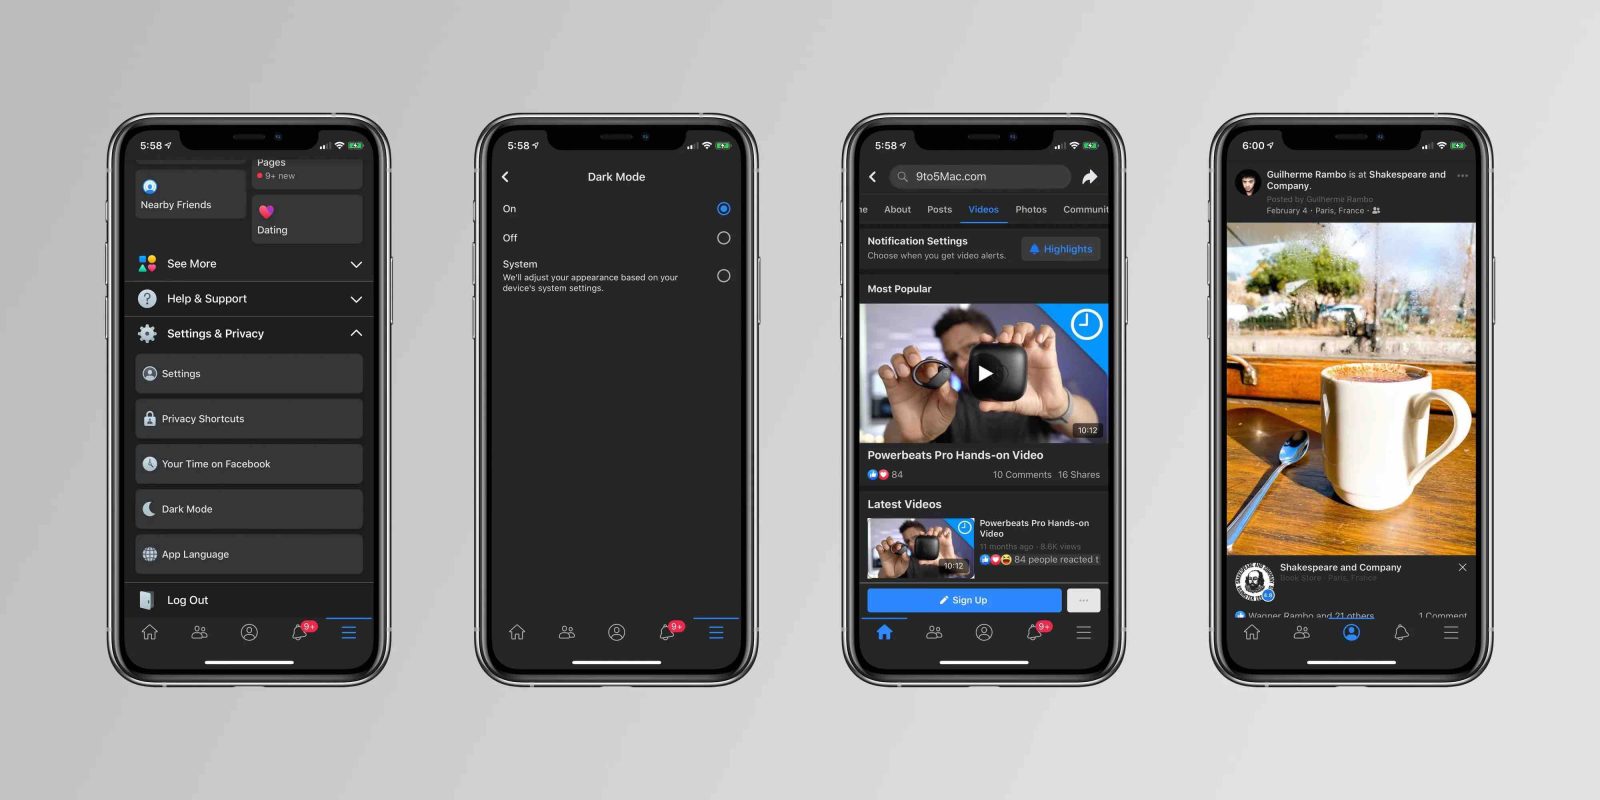 Facebook for iOS dark mode interface disappears for many users